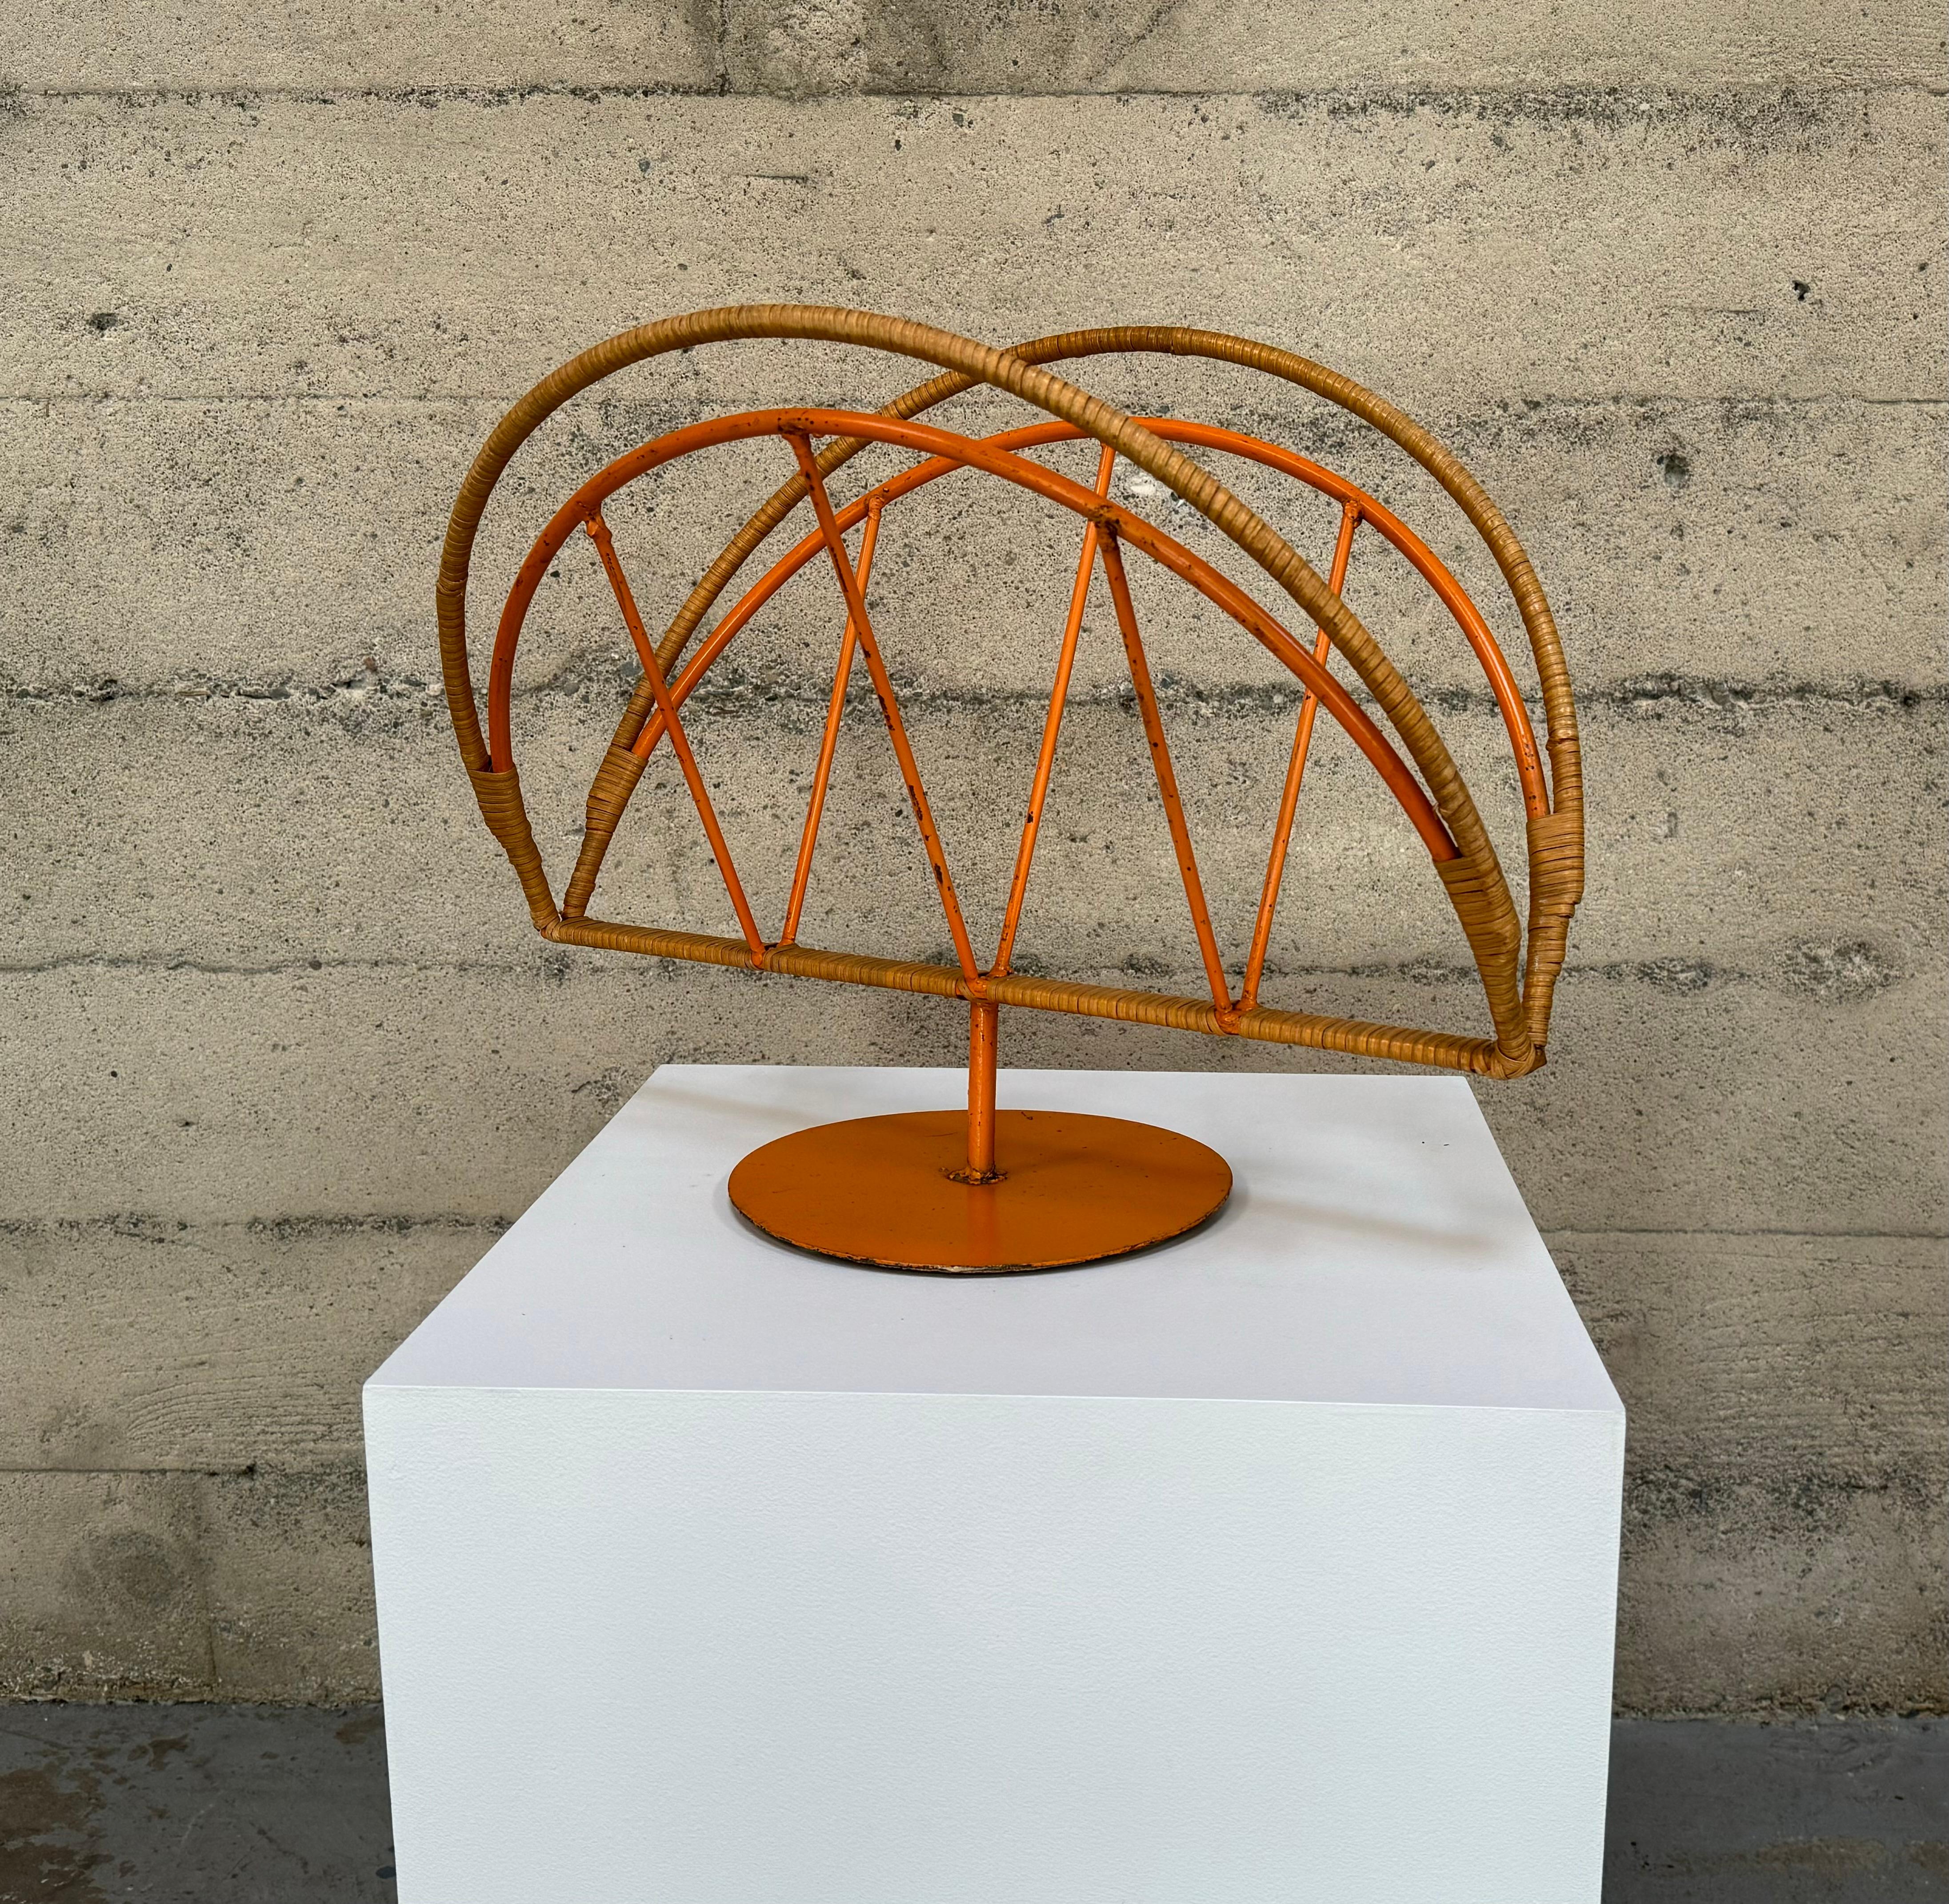 1960s welded cane wrapped iron magazine holder painted in a salmon lacquer. Double arched form with cross bars running within the arch resting on a round base. Arthur Umanoff was a New York designer in the early 1950s into the 1960s who had a